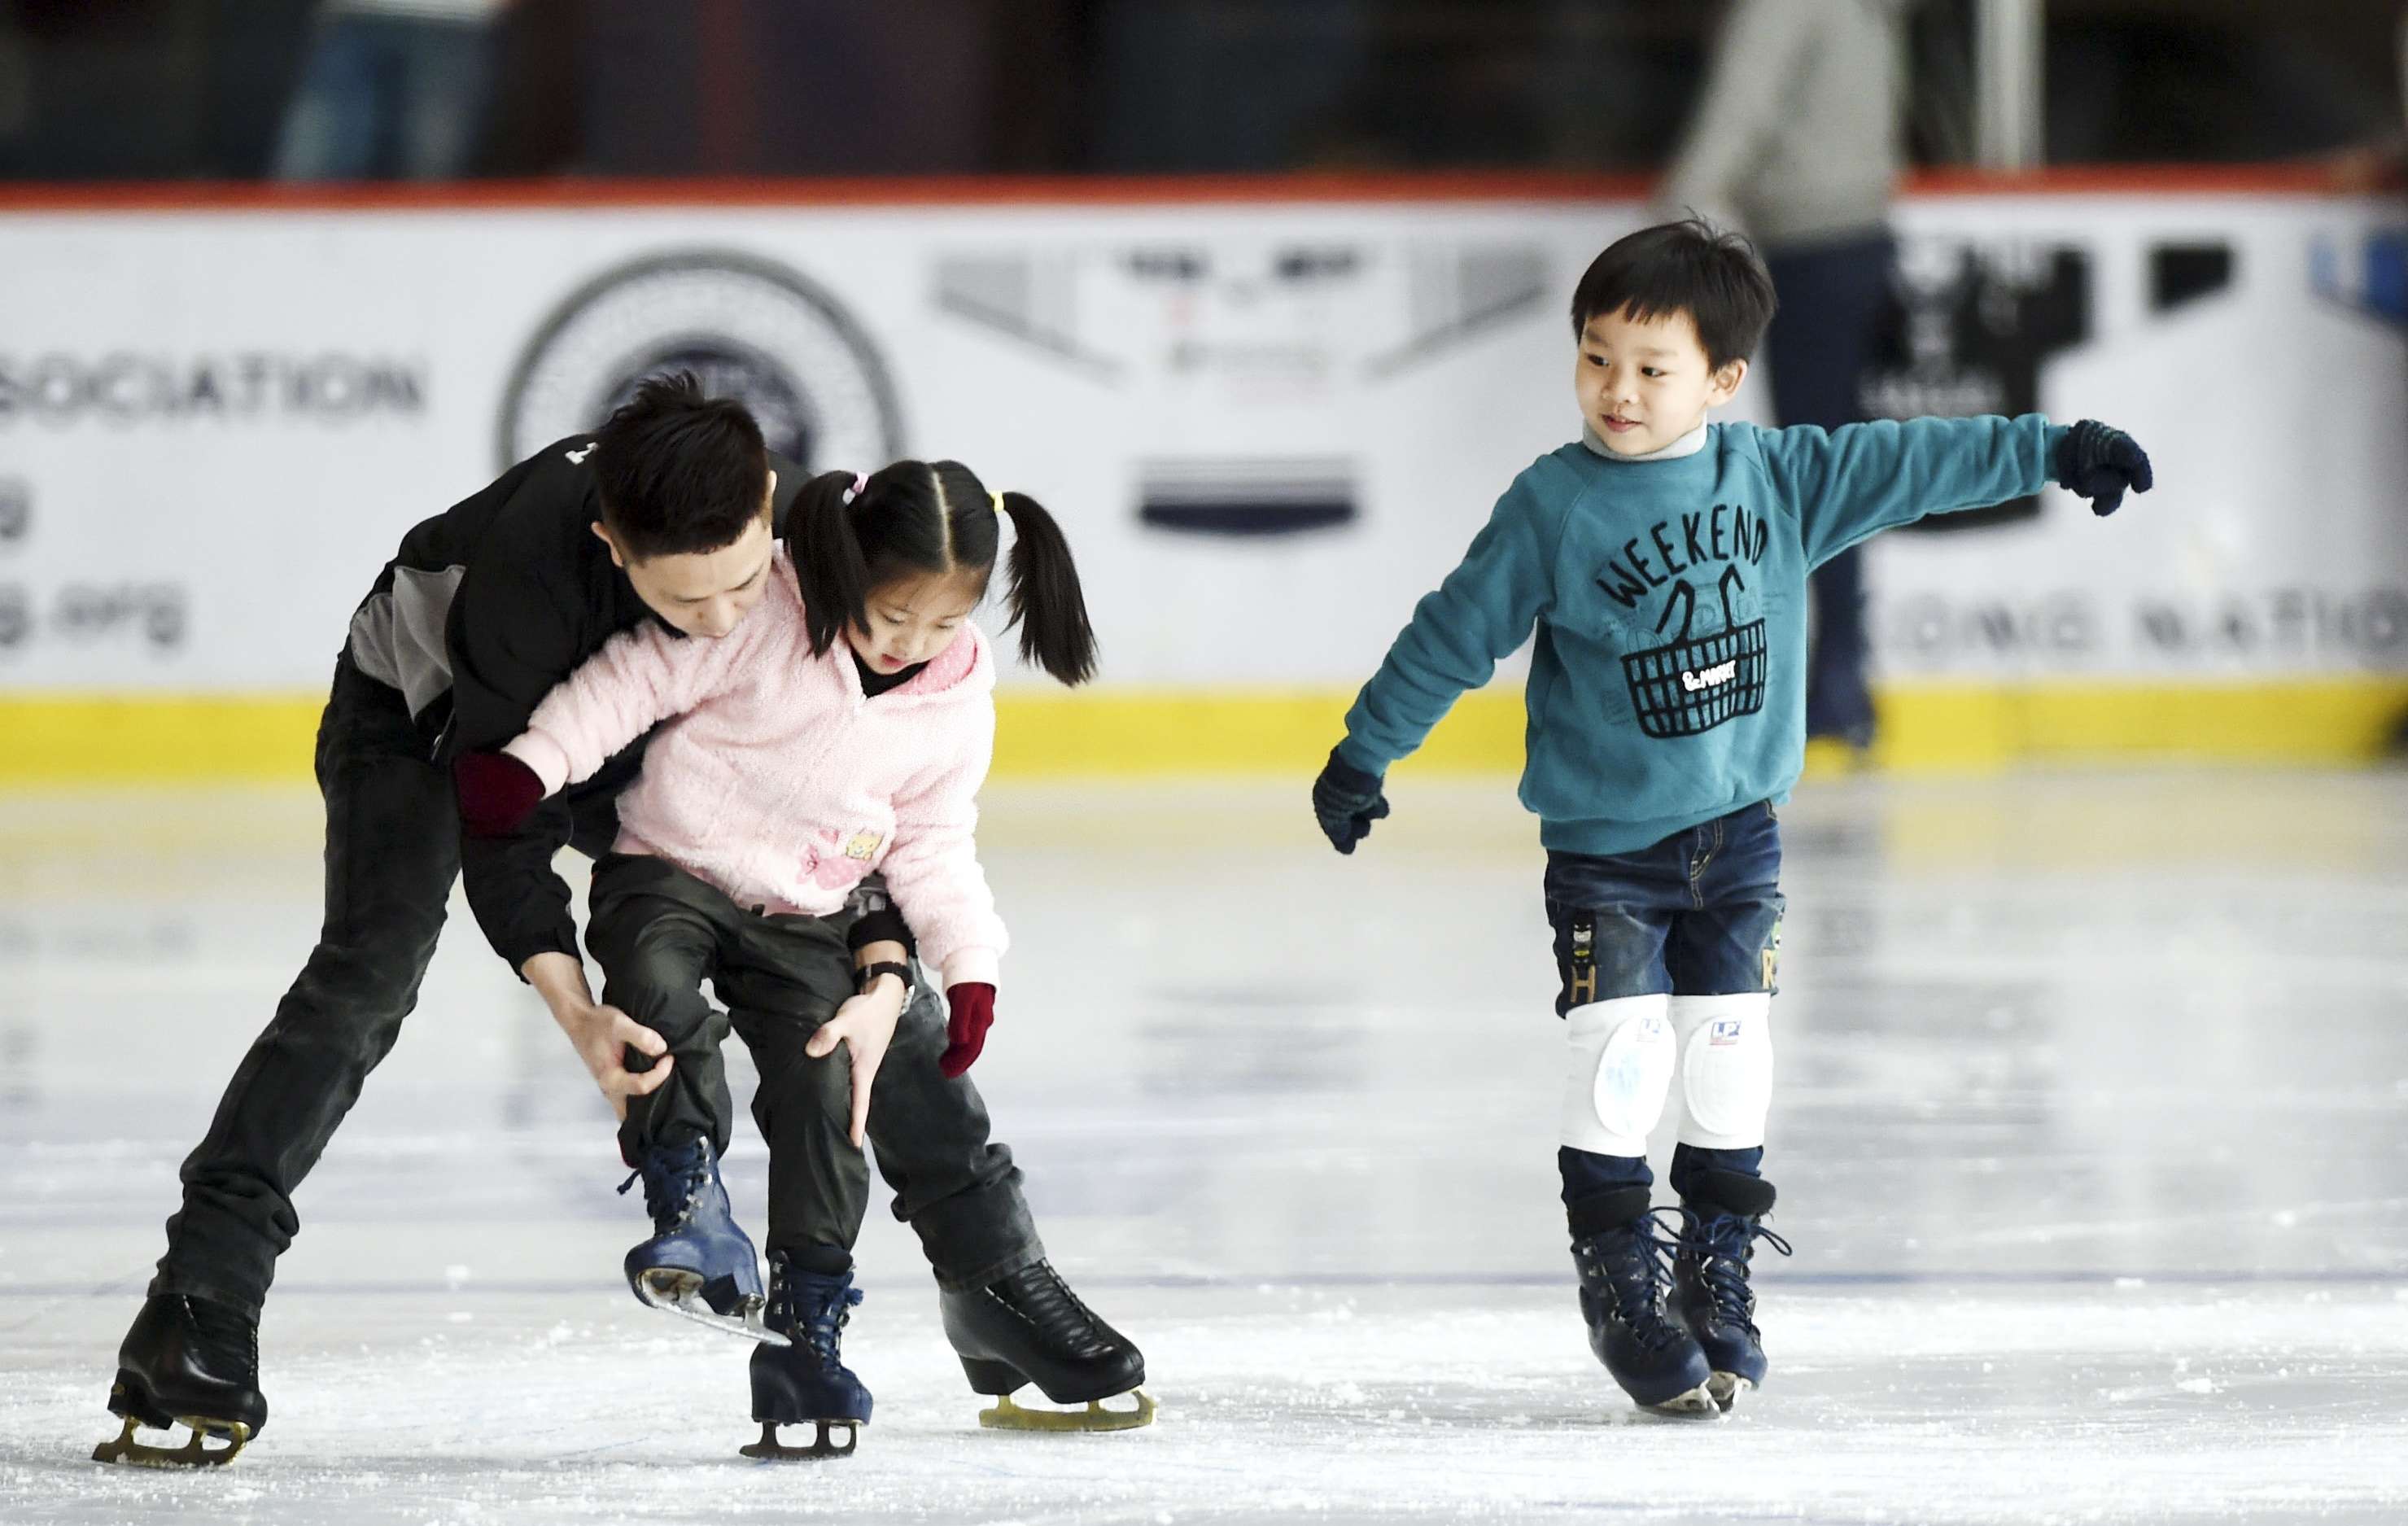 Children learn to skate in Hong Kong. As we mark Children’s Day on April 4, we should reflect on whether we as a society are doing enough to ensure the well-being of our children. Photo: Xinhua